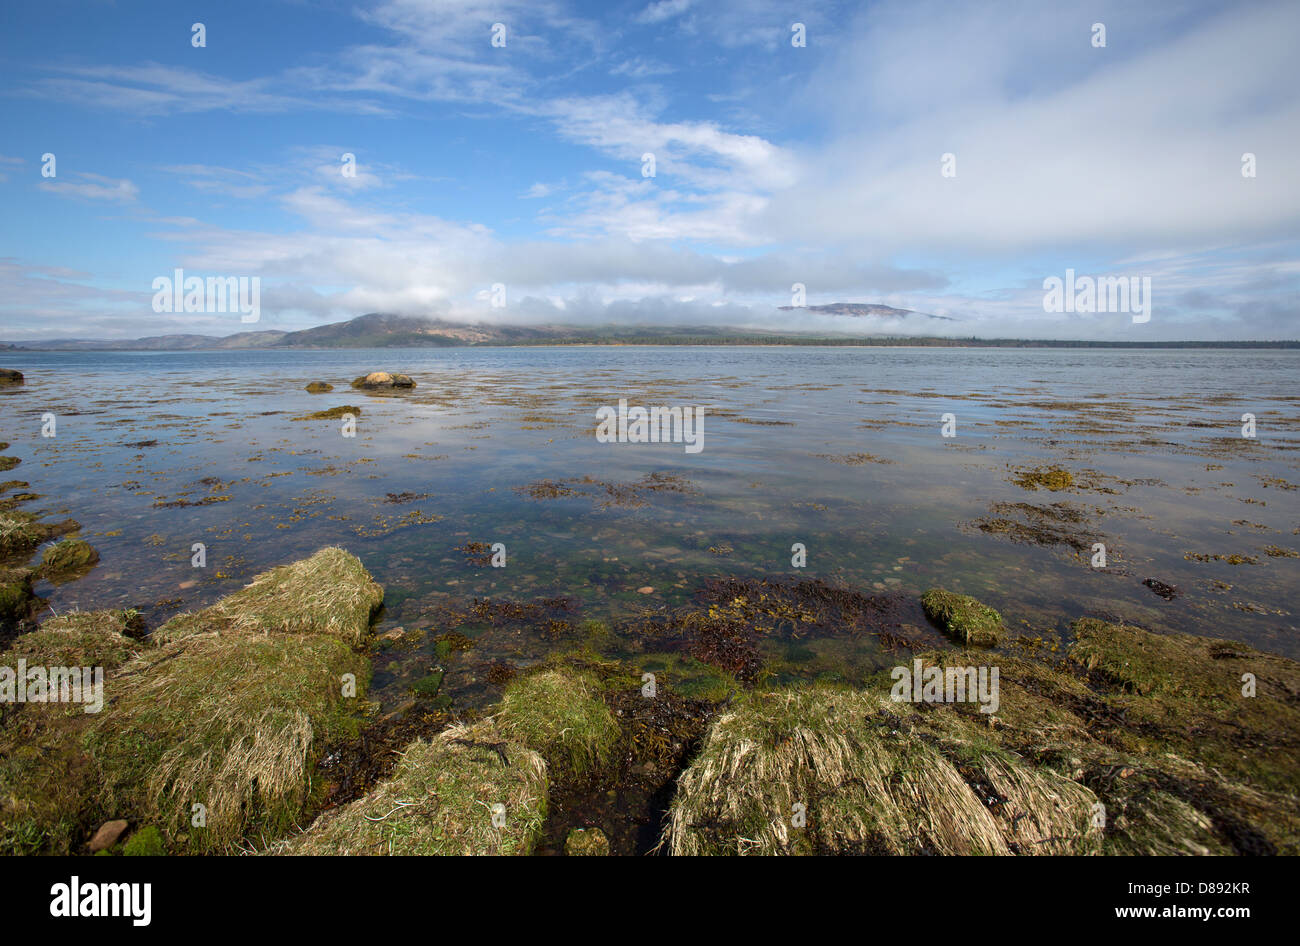 Loch Fleet, Scotland. Loch Fleet with a cloud covered Balblair Wood, Mound Rock and Silver Rock in the background. Stock Photo